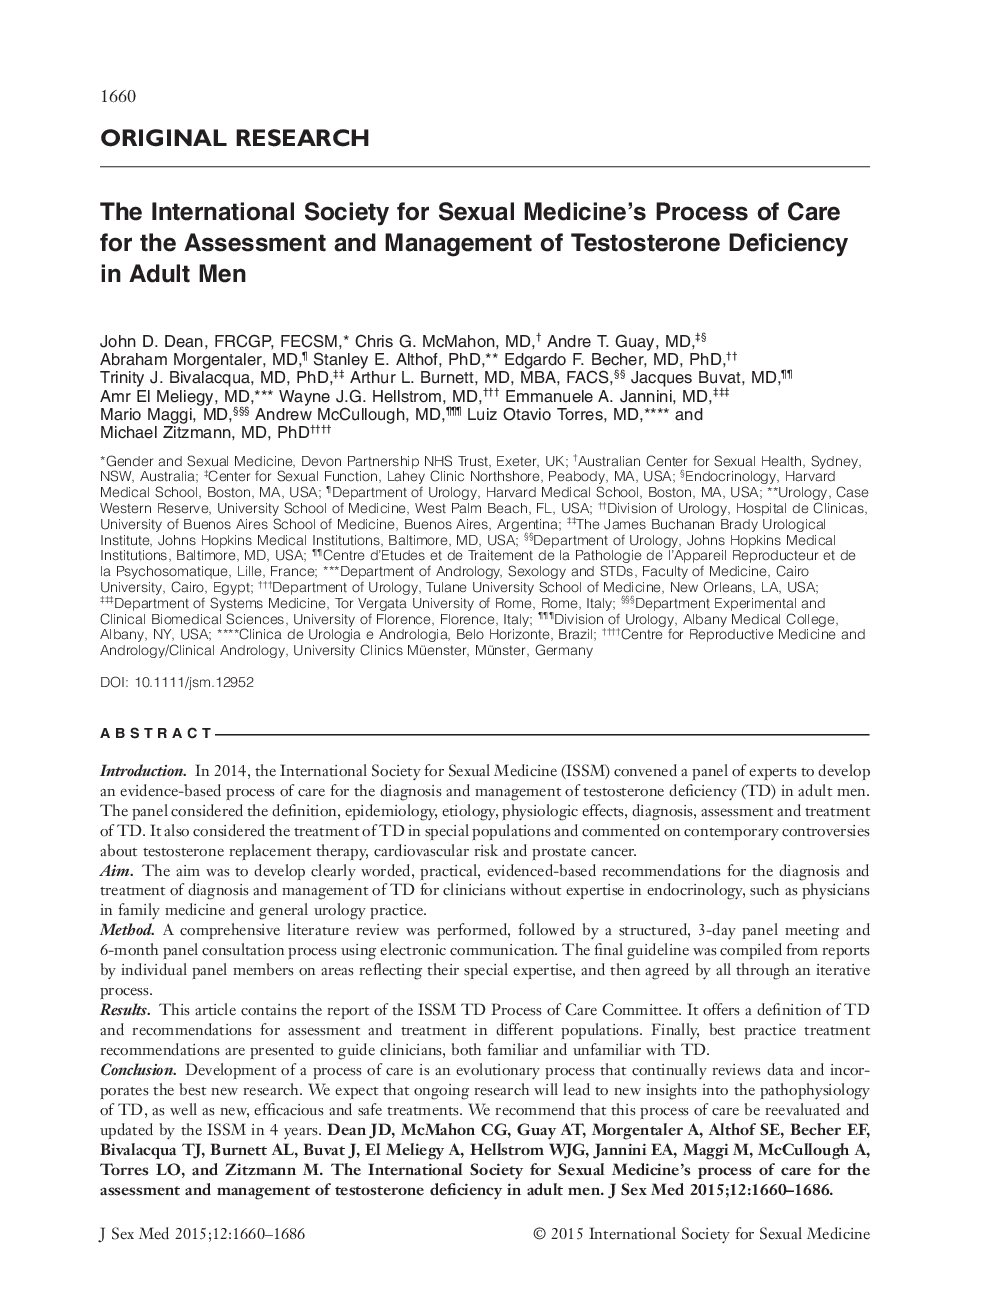 The International Society for Sexual Medicine's Process of Care for the Assessment and Management of Testosterone Deficiency in Adult Men